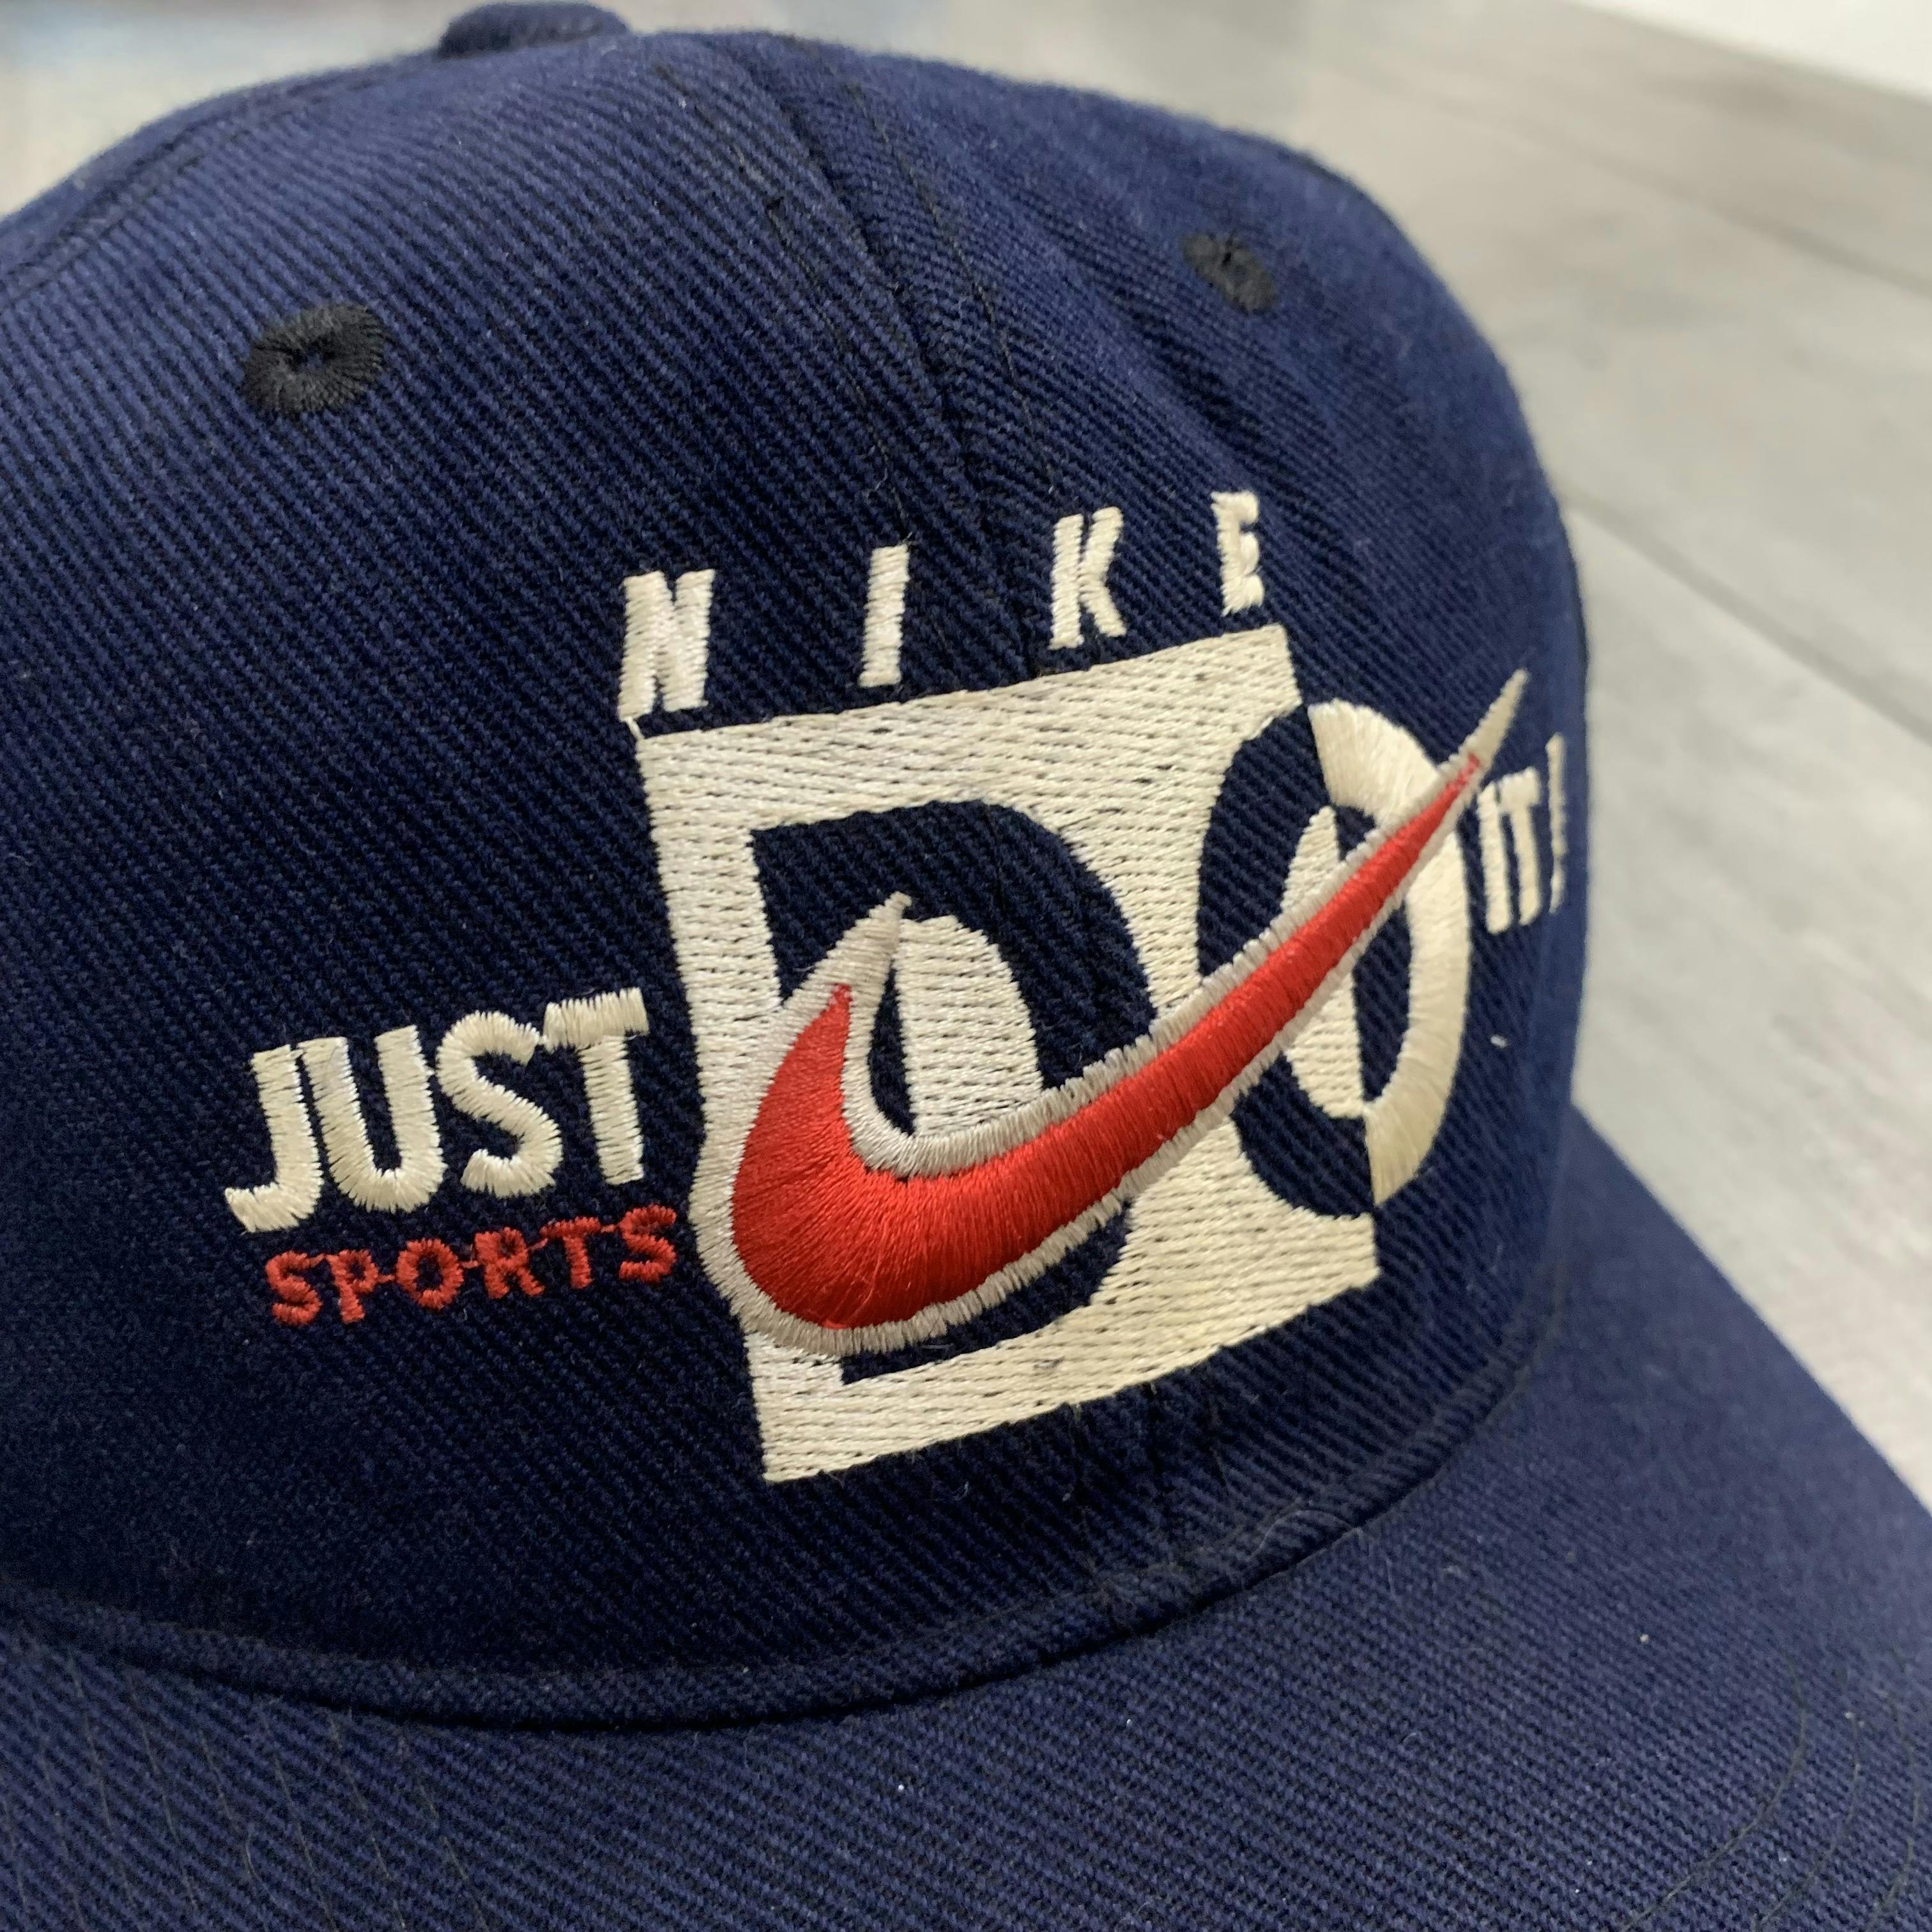 Vintage 90s Nike Embroidered Velcro Cap Hats - 3